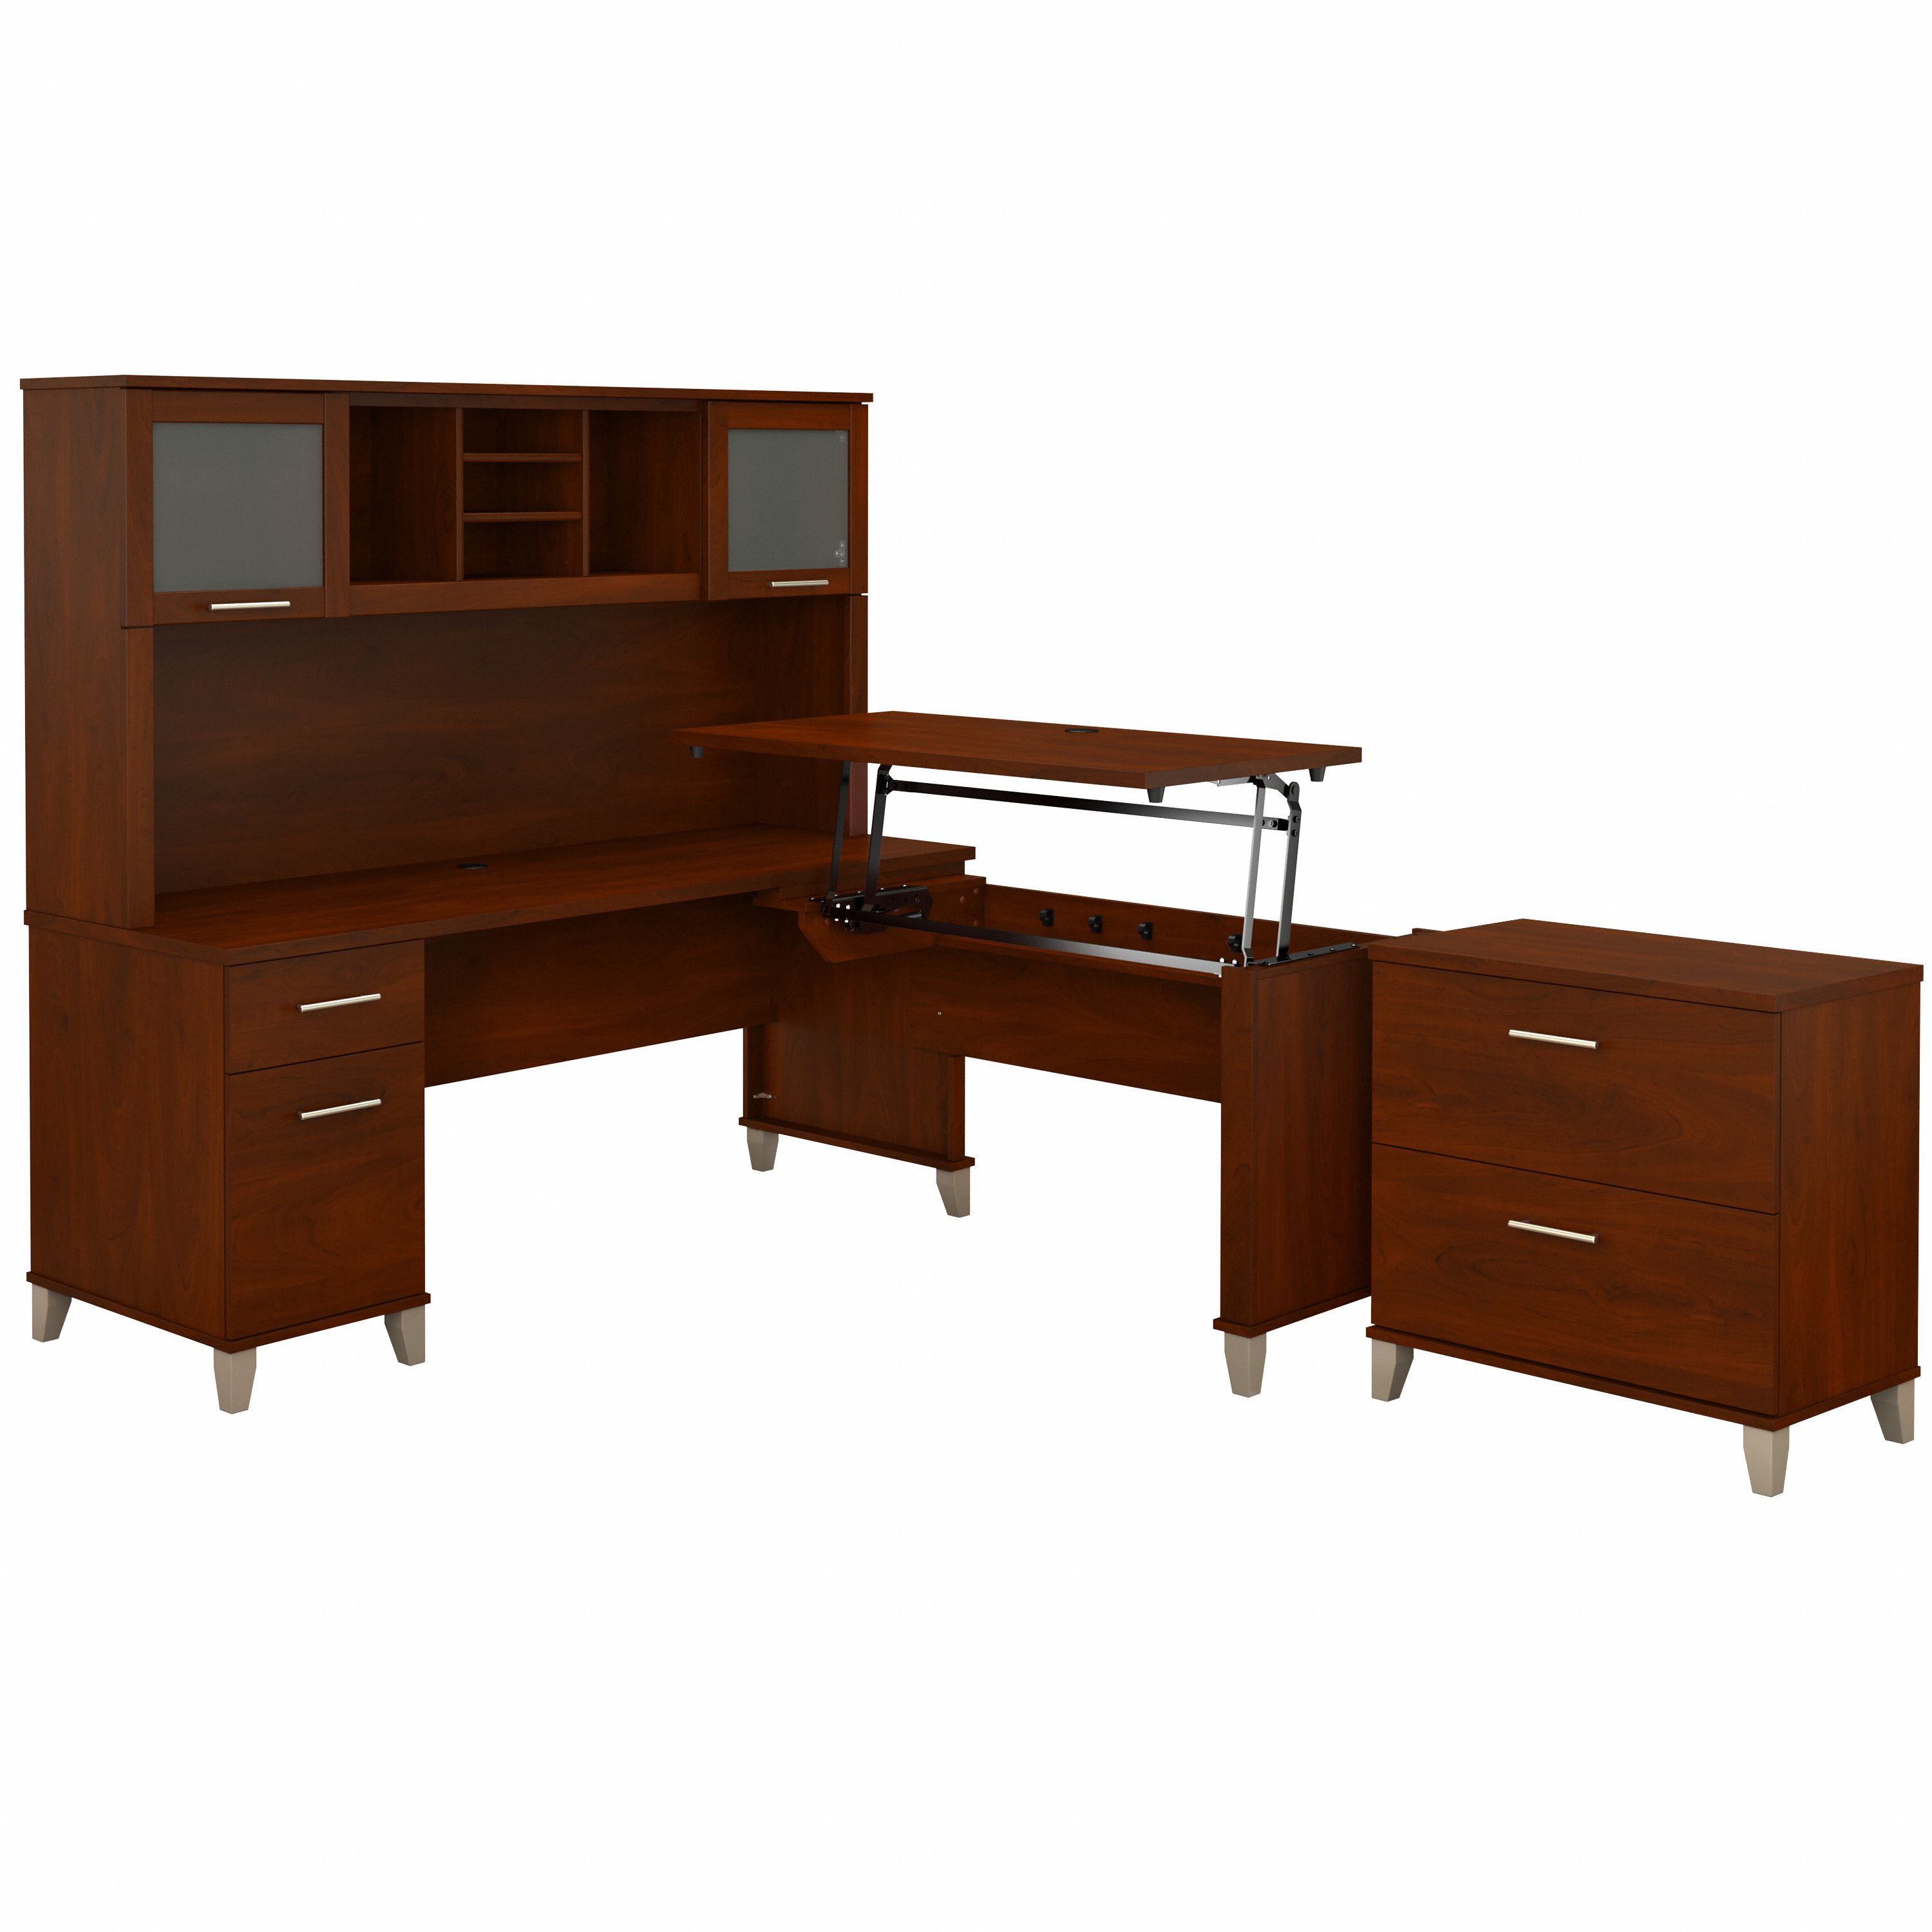 Shop Bush Furniture Somerset 72W 3 Position Sit to Stand L Shaped Desk with Hutch and File Cabinet 02 SET016HC #color_hansen cherry